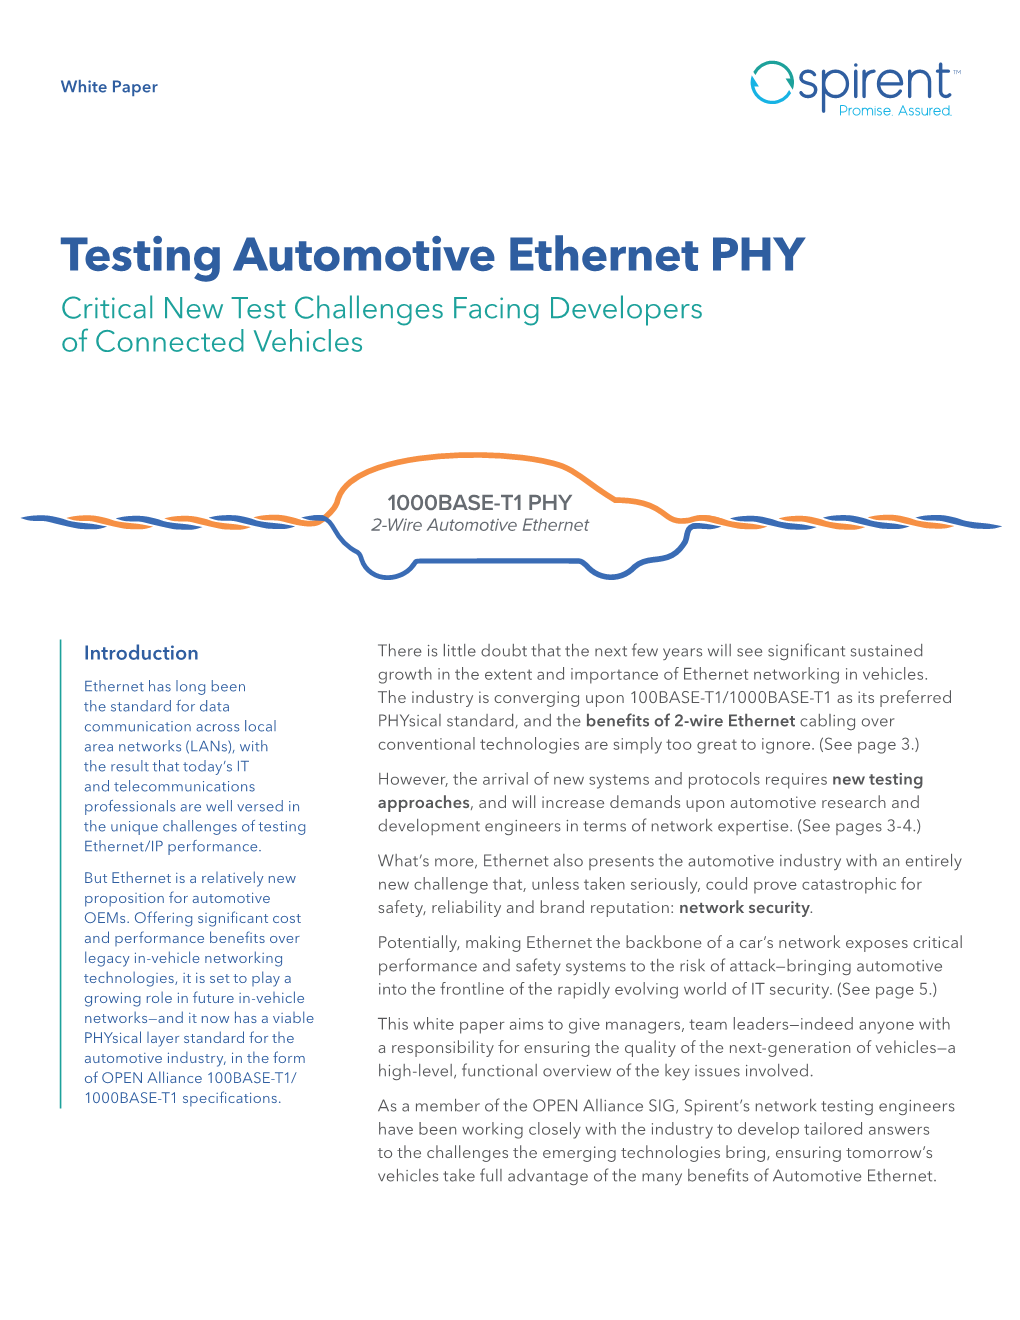 Testing Automotive Ethernet PHY Critical New Test Challenges Facing Developers of Connected Vehicles